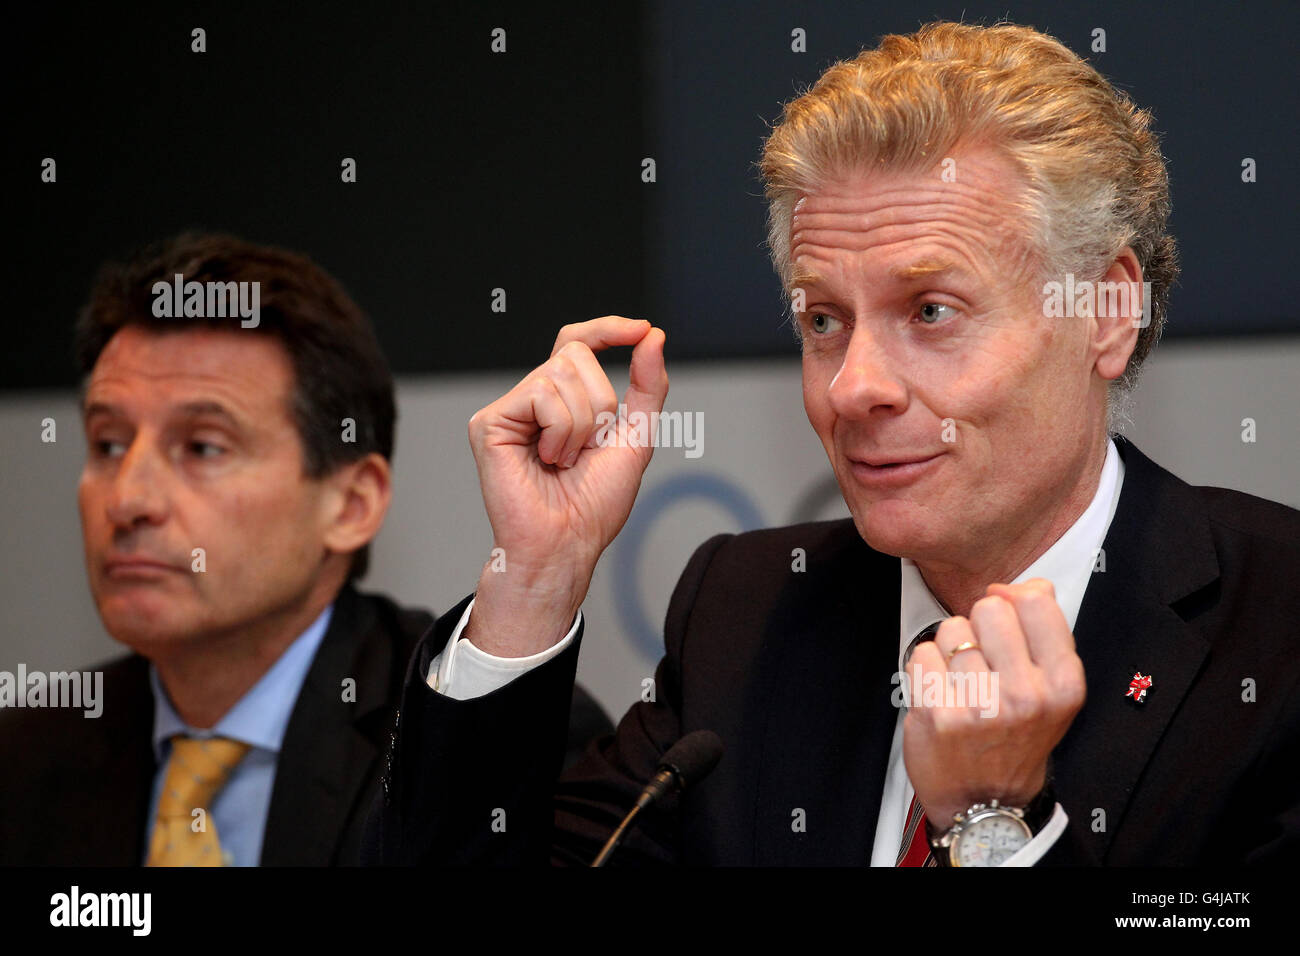 LOCOG CEO Paul Deighton (right) alongside LOCOG Chair Lord Sebastian Coe during the Closing Press Conference from the IOC Coordination Commission at Freshfield Bruckhaus Deringer, London. Stock Photo